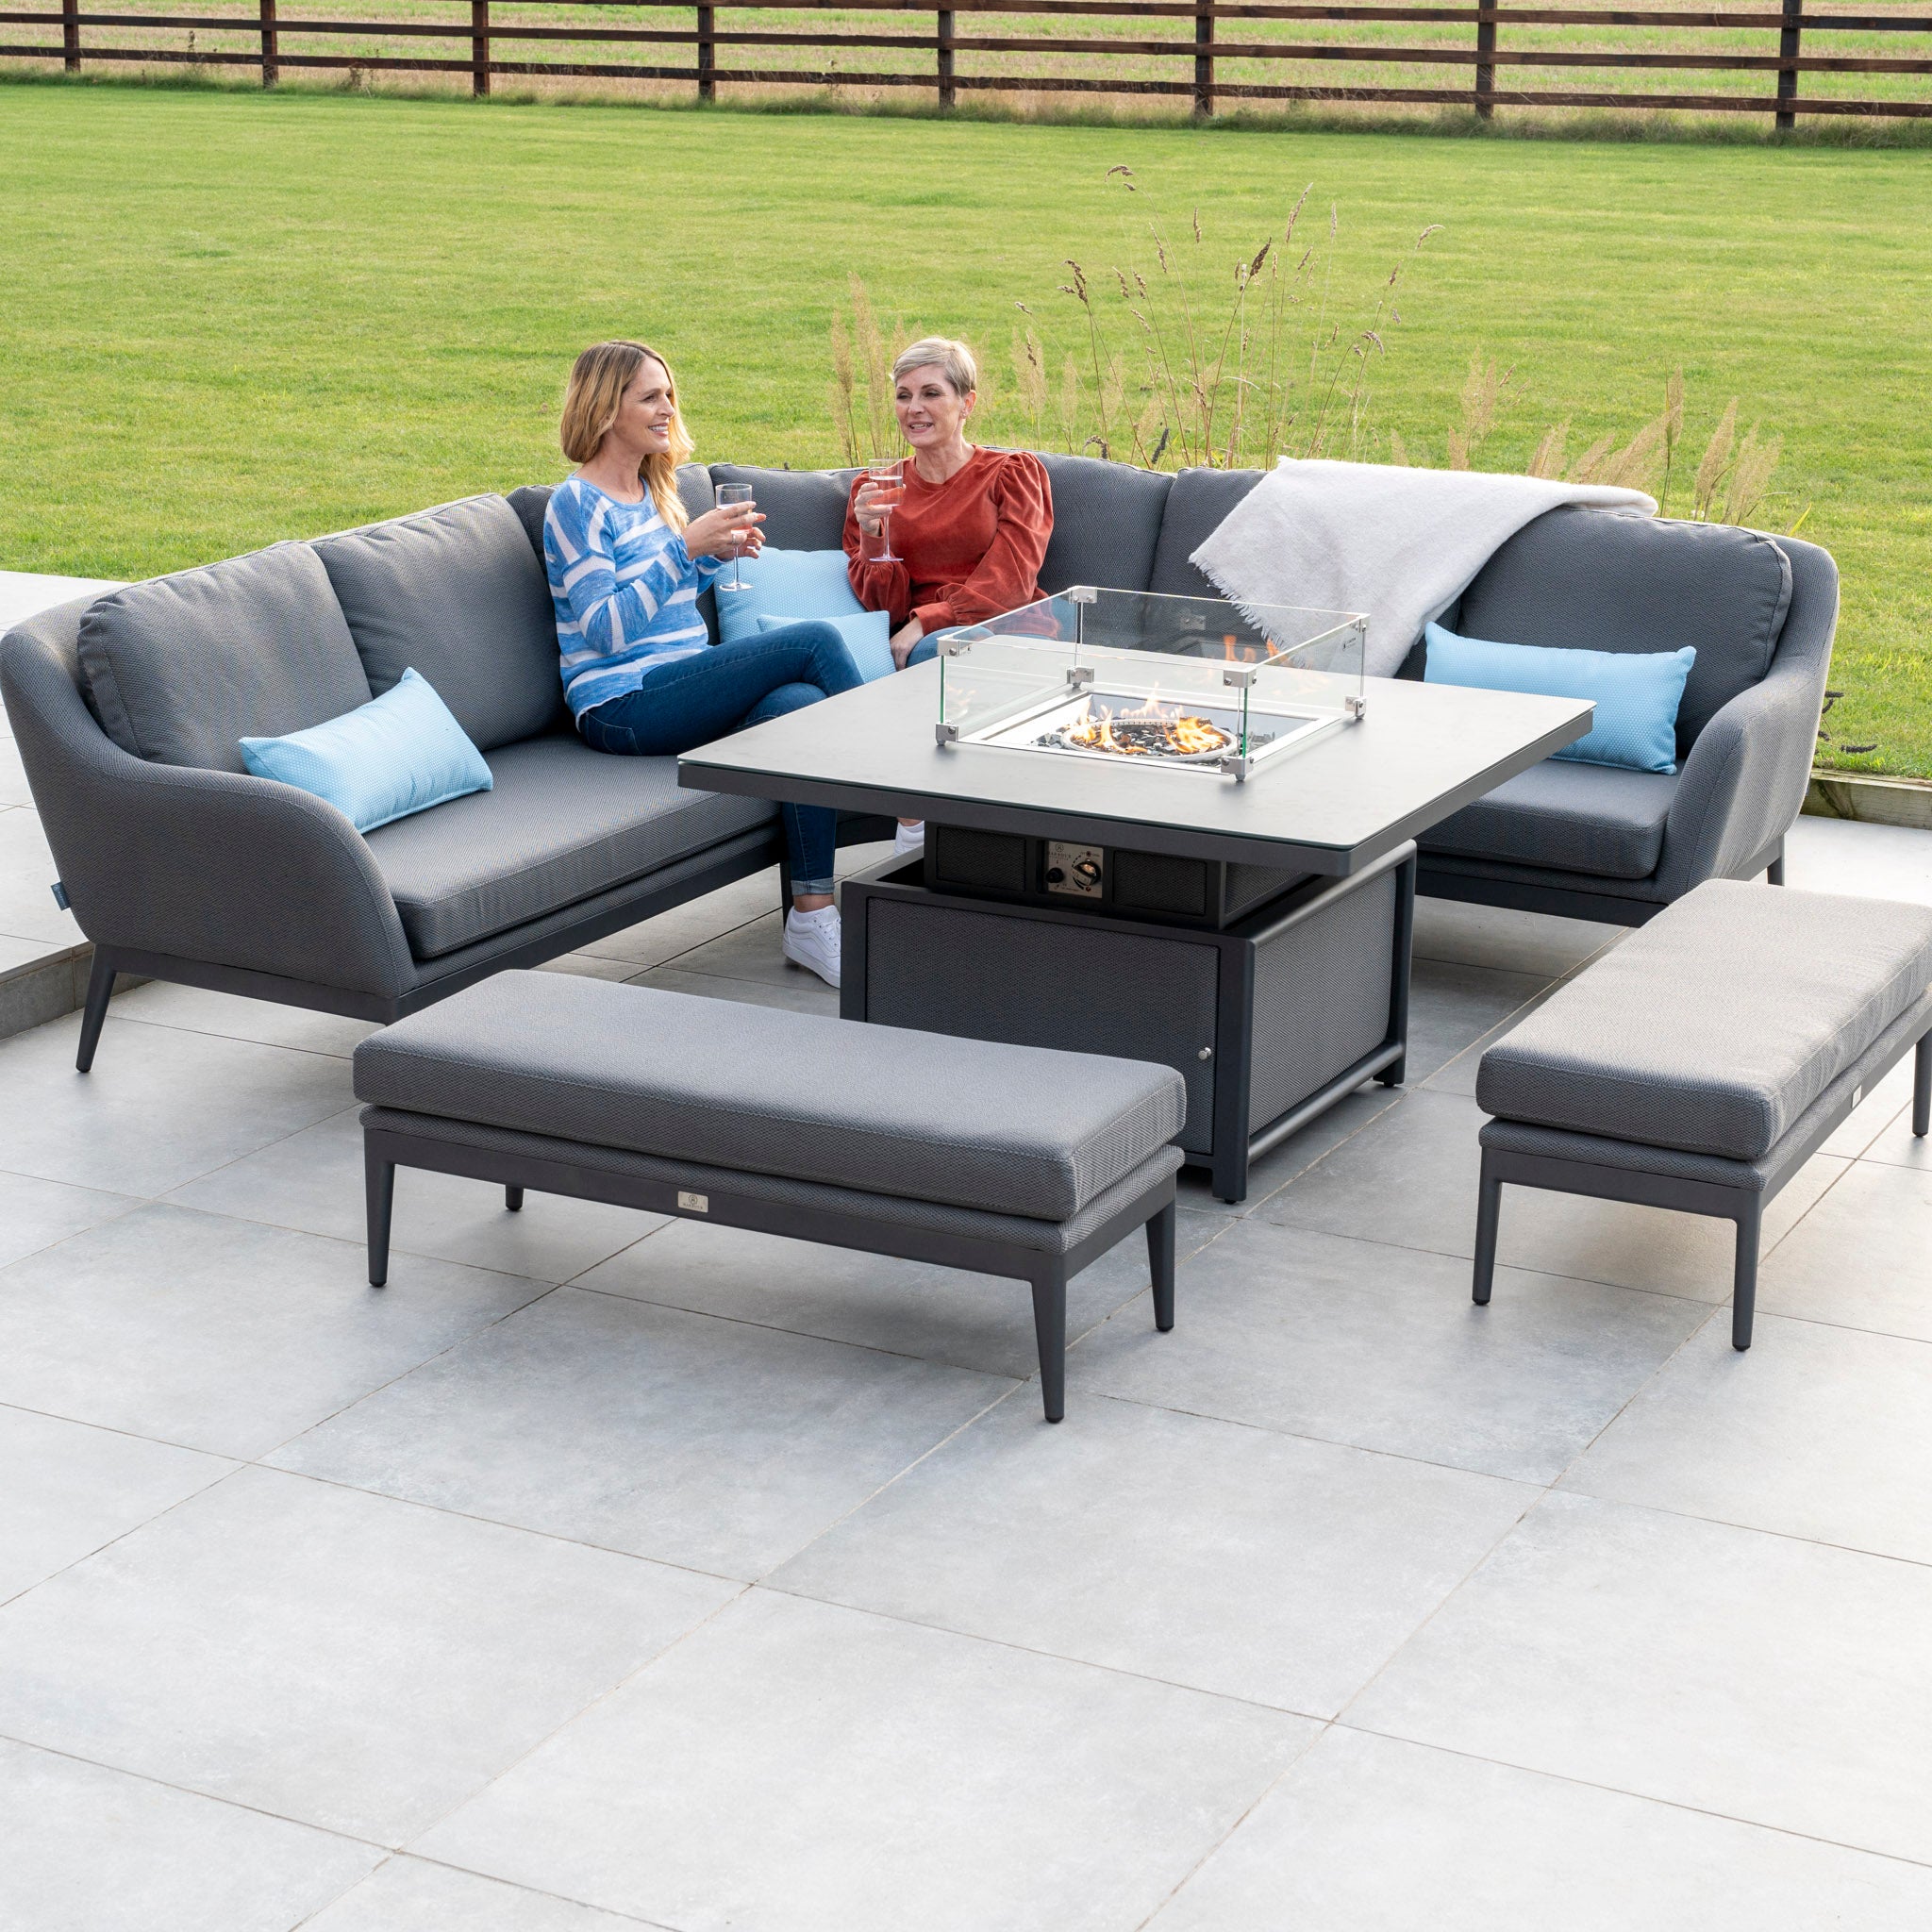 Luna Deluxe Outdoor Fabric Square Corner Dining Set with Rising Firepit Table in Grey